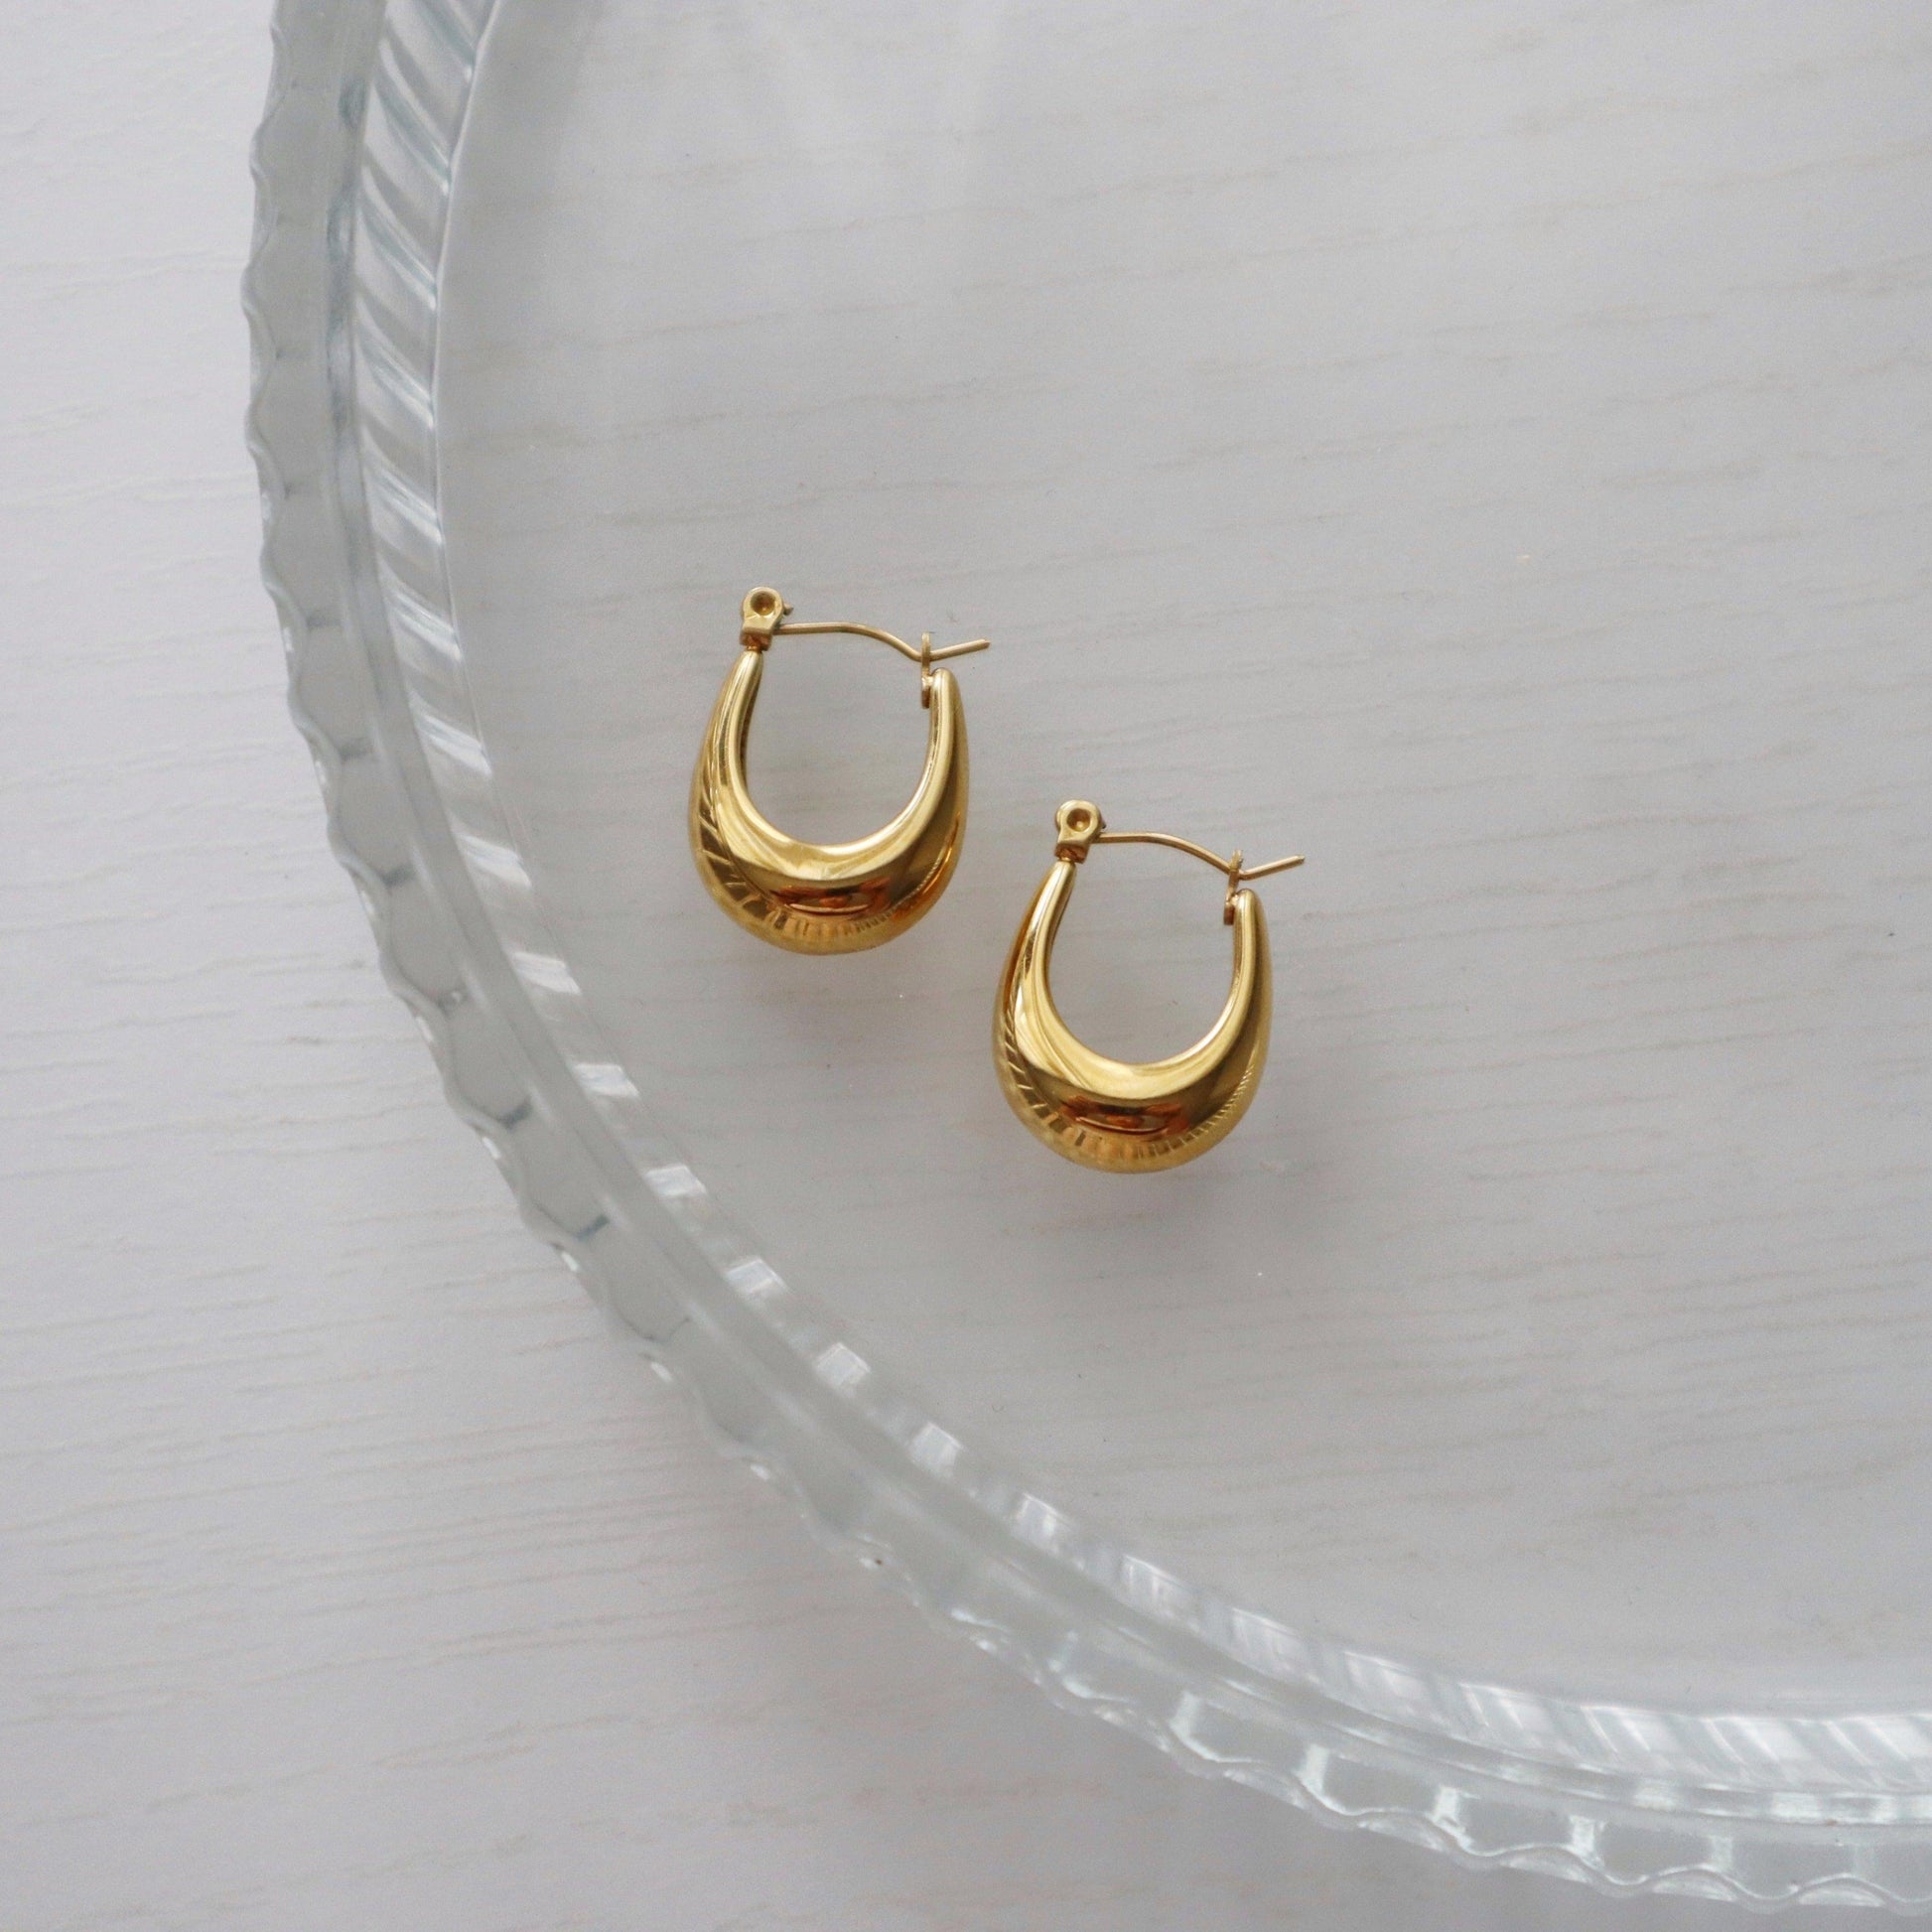 Sydney Hoops | Chunky Hoops - JESSA JEWELRY | GOLD JEWELRY; dainty, affordable gold everyday jewelry. Tarnish free, water-resistant, hypoallergenic. Jewelry for everyday wear